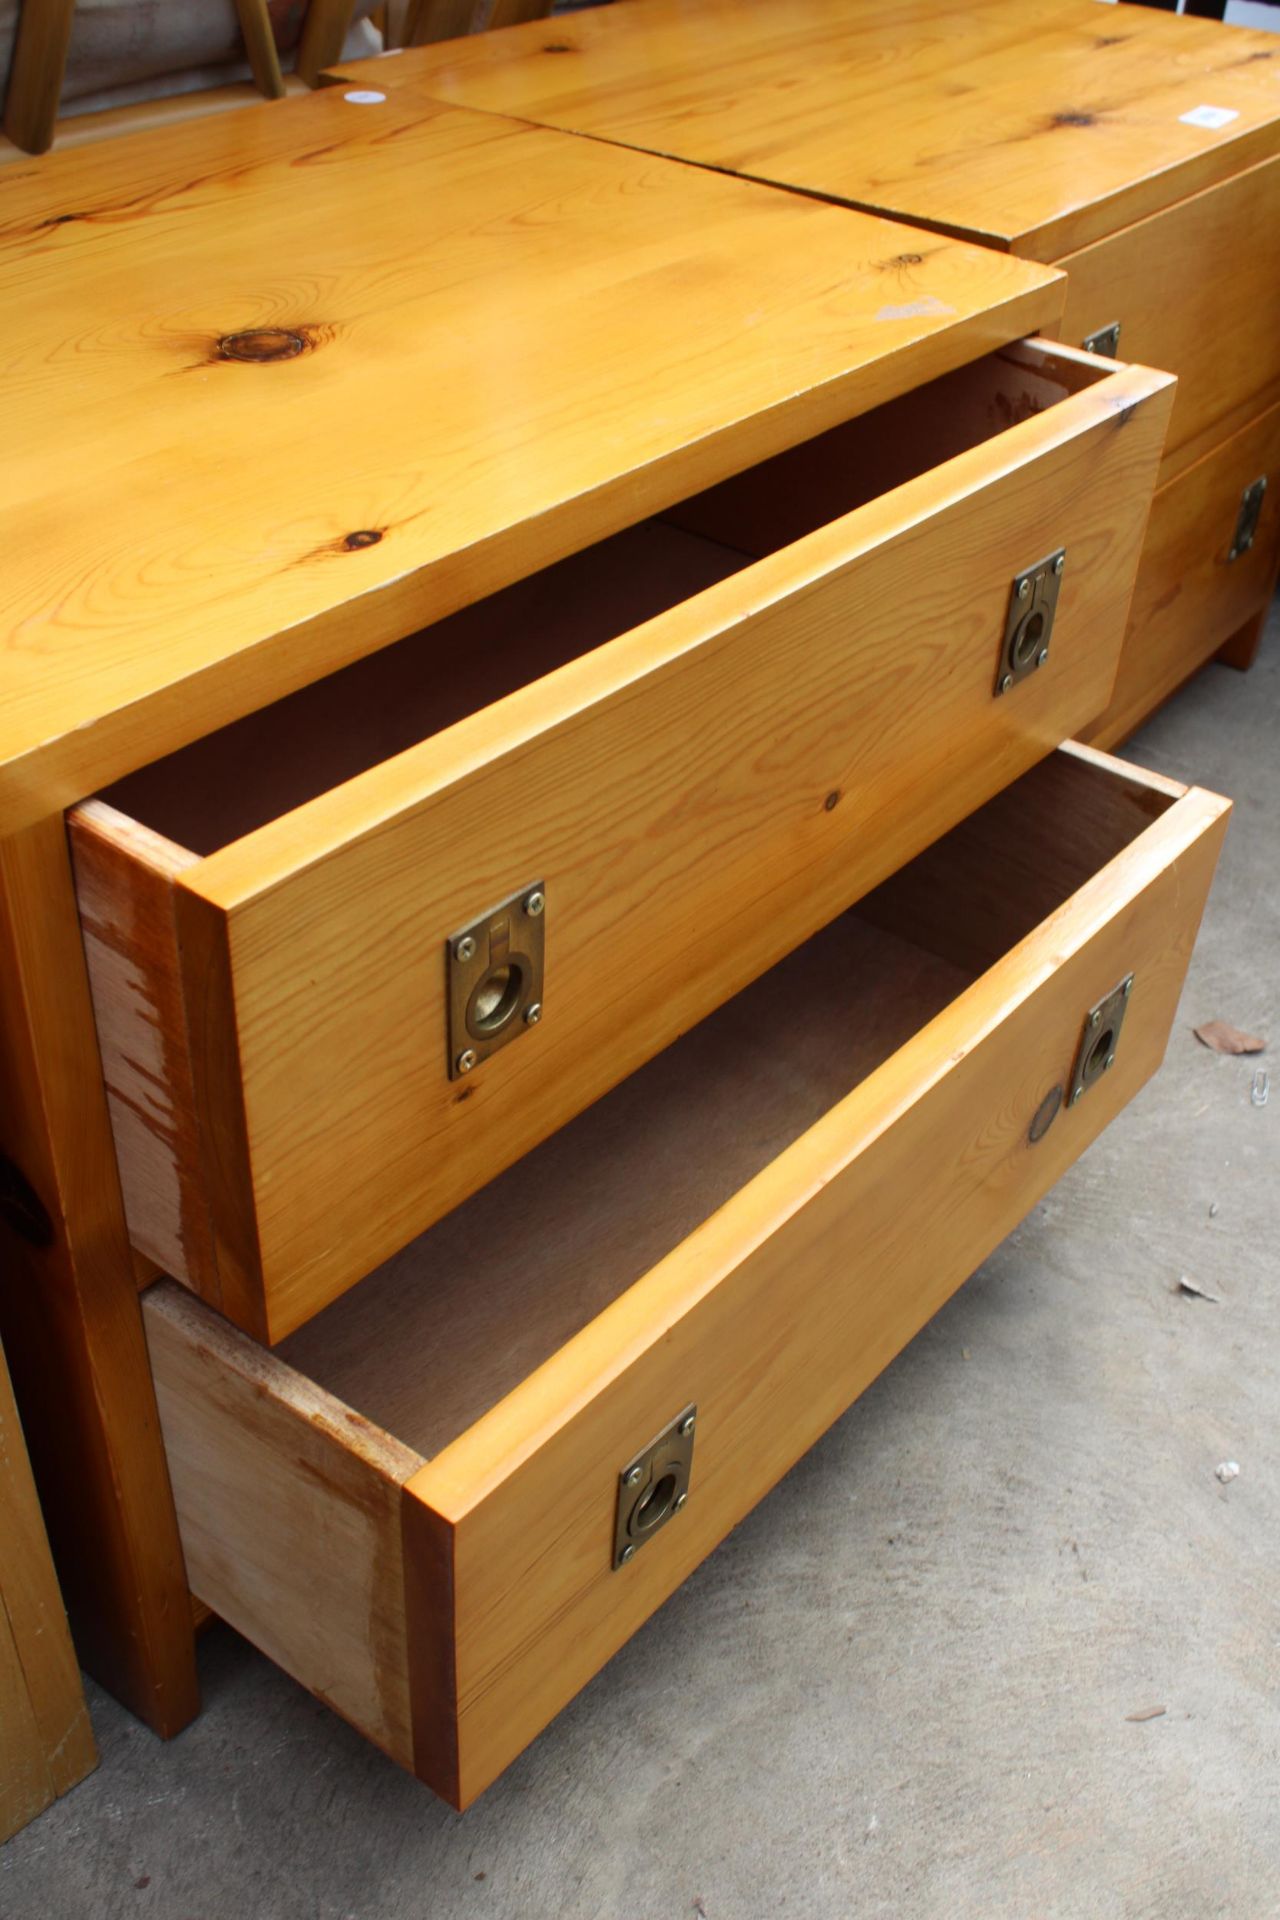 A PAIR OF MODERN PINE TWO DRAWER CHESTS WITH BRASS HANDLES - Image 2 of 2